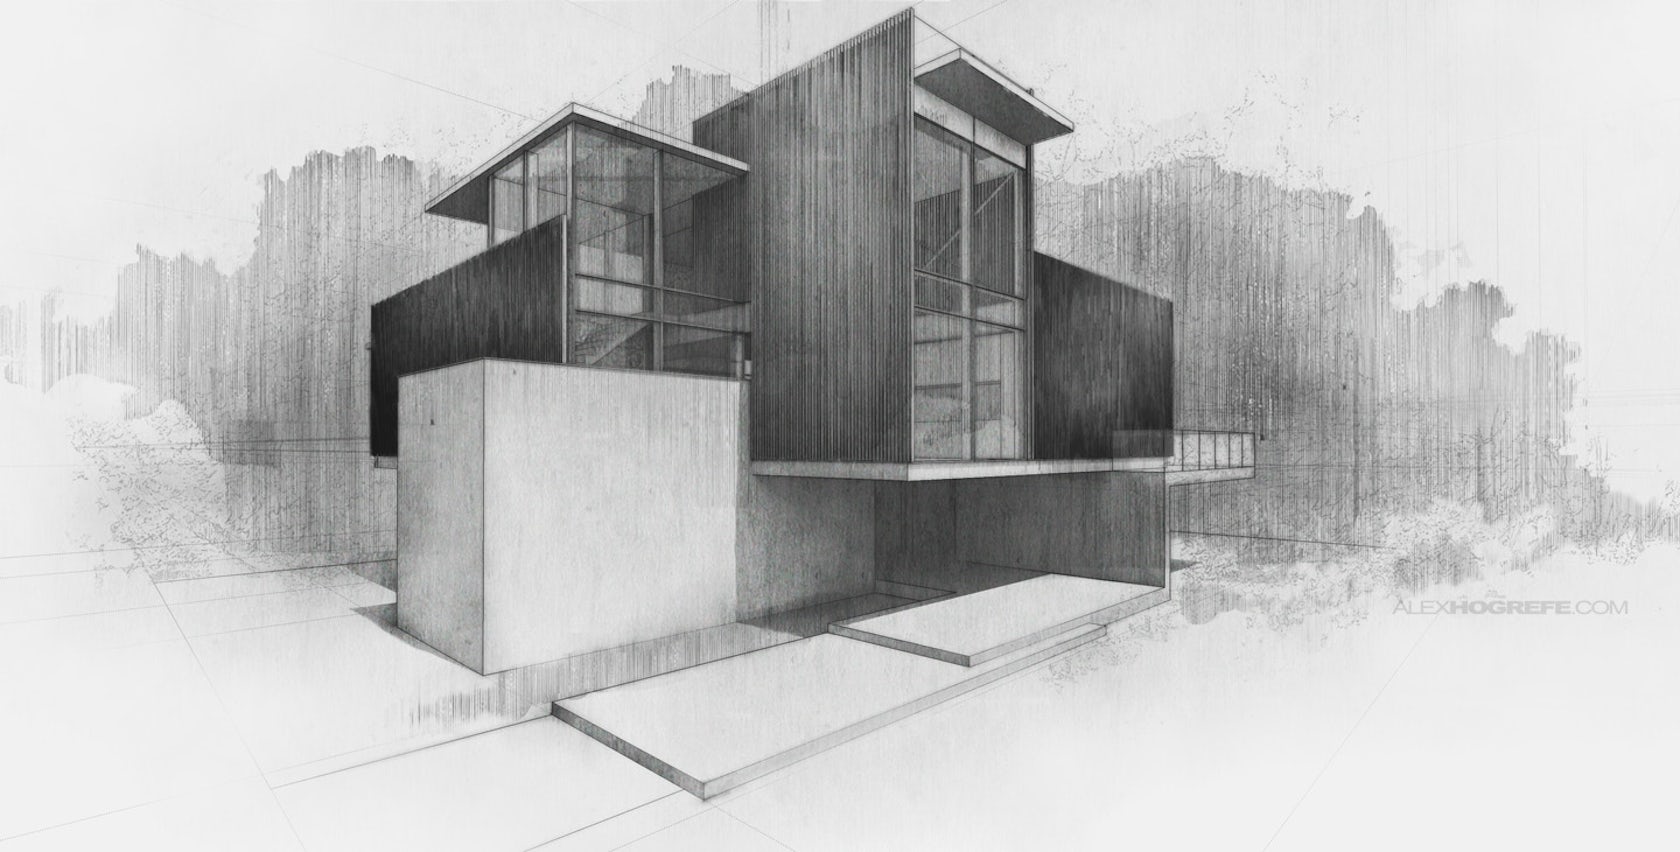 The Art of Rendering How to Create an Emotive Architectural Sketch in